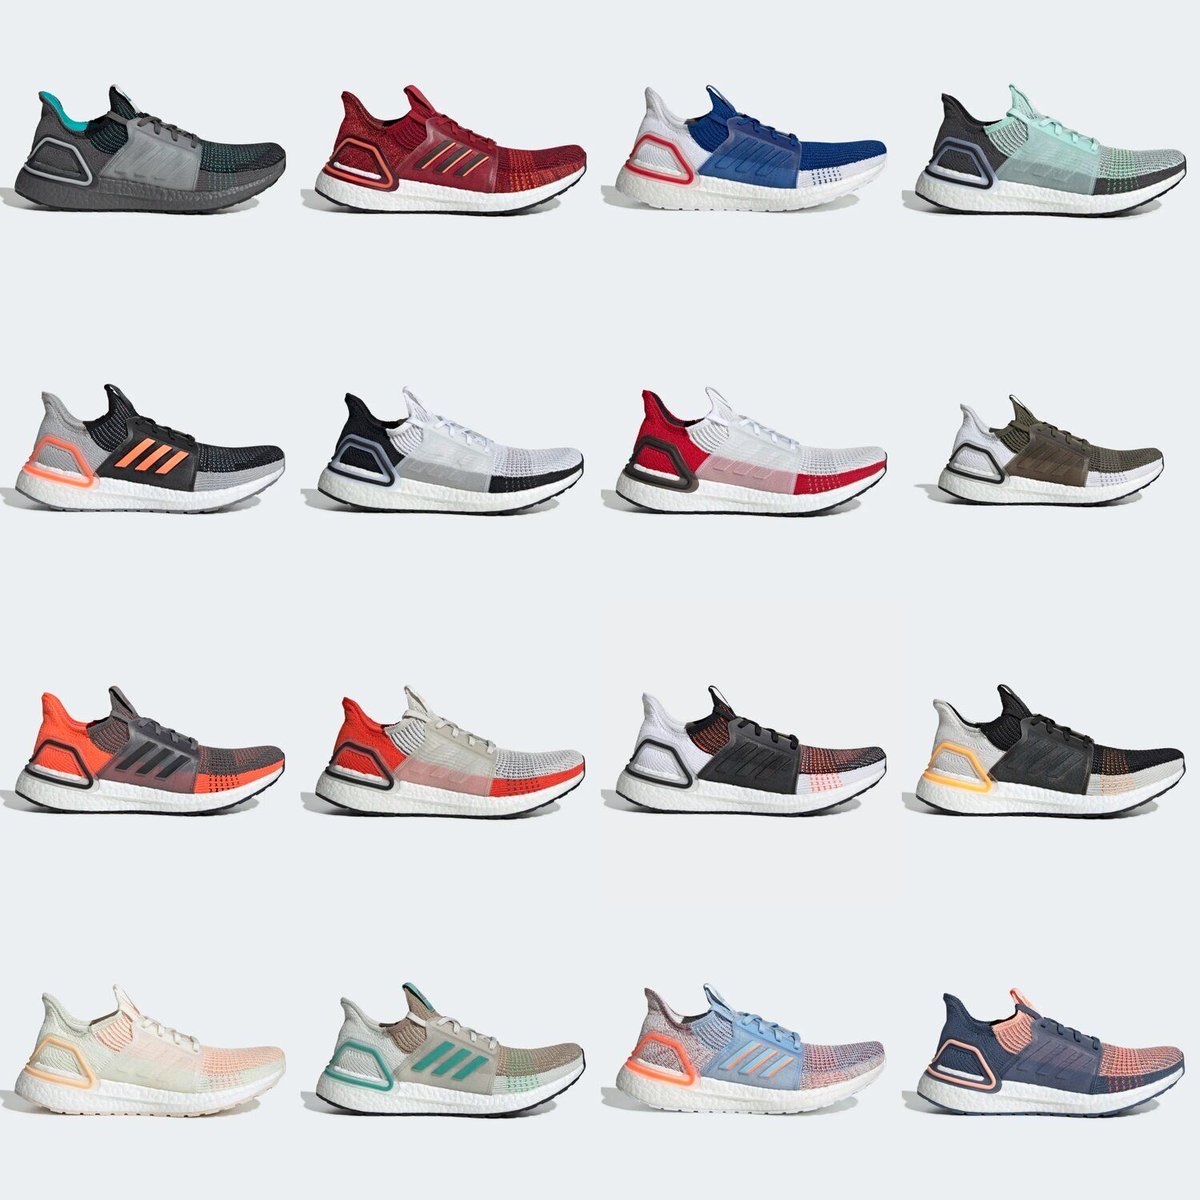 every ultra boost colorway